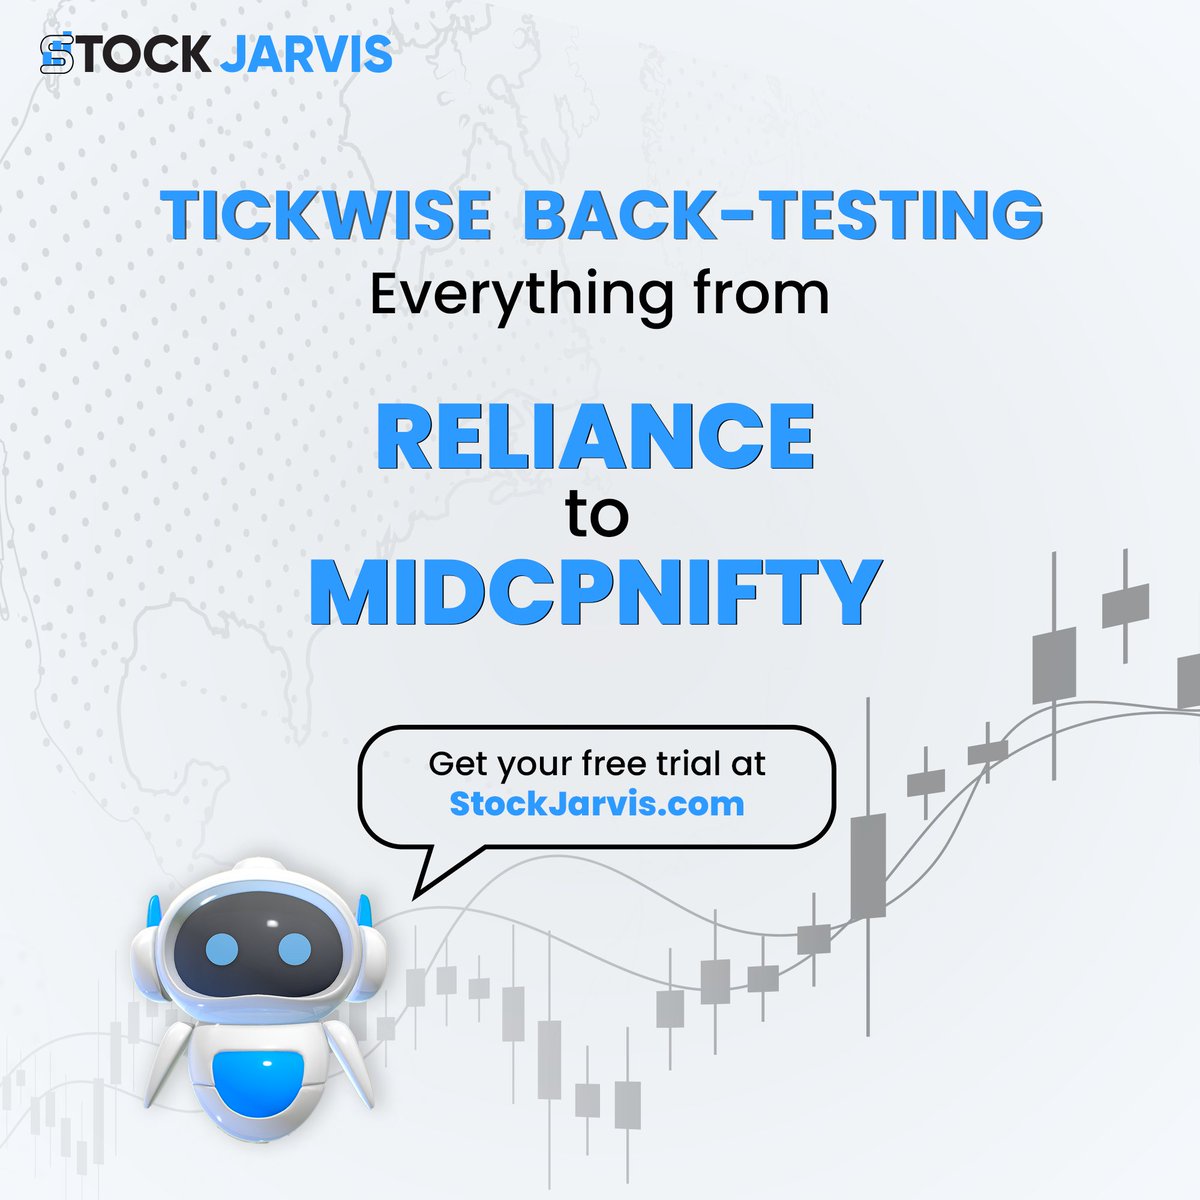 'Unlocking the Power of Tick wise Data.Backtesting with Stockjarvis- Where Strategy Meets Precision. 
#Backtesting #DataDriven #TradingTools #DataAnalysis #FinancialAnalytics #MarketResearch #AlgorithmicTrading #BacktestYourIdeas #StrategicAnalysis